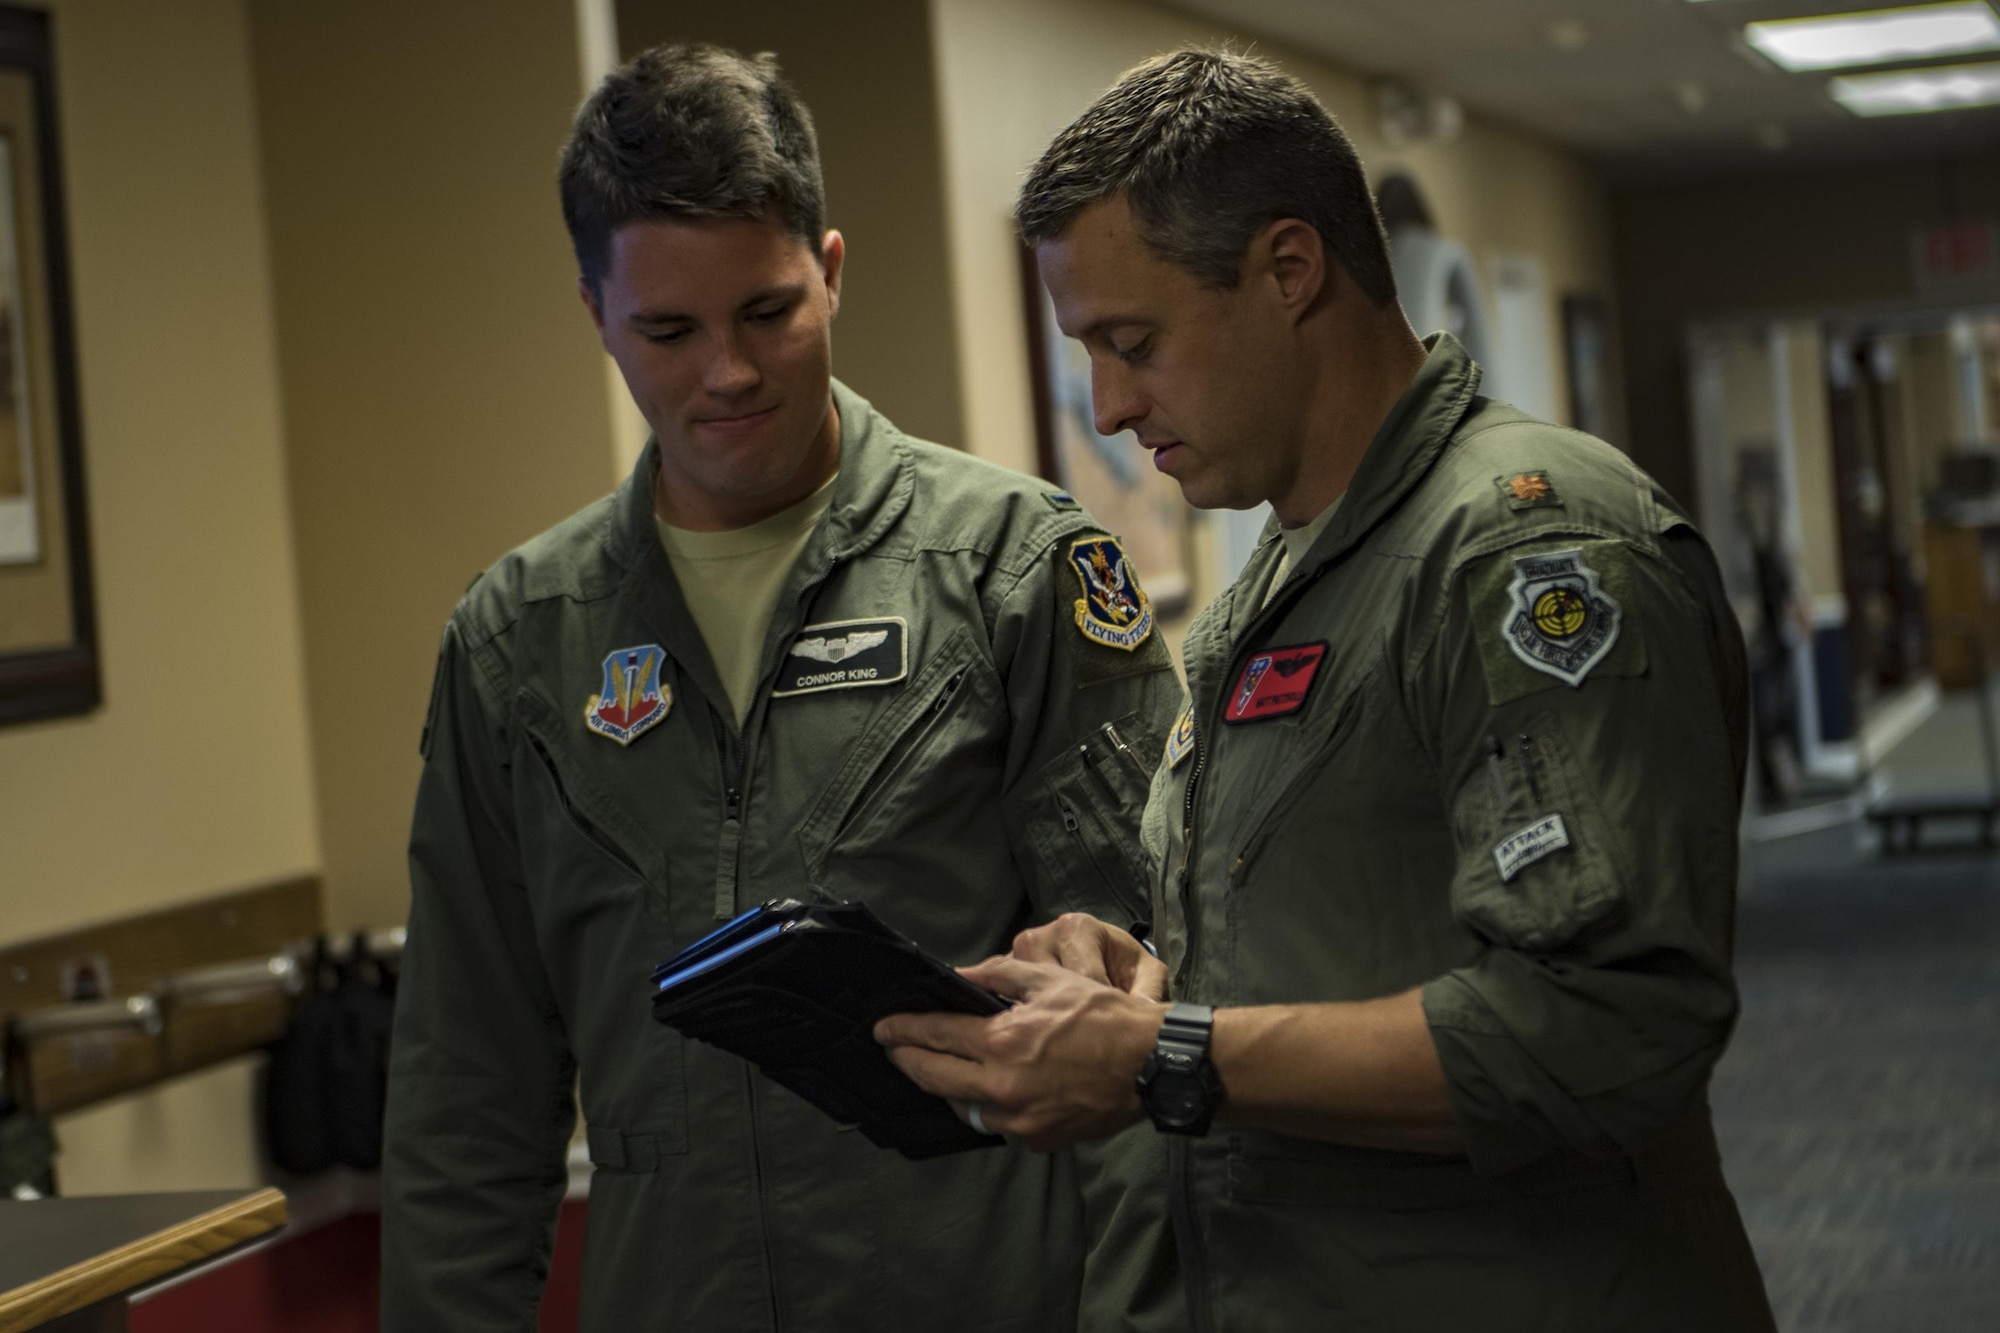 U.S. Air Force Reserve Maj. Matt Paetzhold, 76th Fighter Squadron A-10C Thunderbolt II instructor pilot, talks with 1st Lt. Connor King, 75th Fighter Squadron pilot, Sept. 9, 2017, at Moody Air Force Base, Ga. After graduating the Weapons Instructor Course, Paetzhold joined the Airmen who serve as tactical and operational advisors to military leaders at all levels. Due to the relationship between the 75th FS and 76th FS, Paetzhold is slated to deploy as the 75th FSs weapons officer. (U.S. Air Force photo by Senior Airman Daniel Snider)